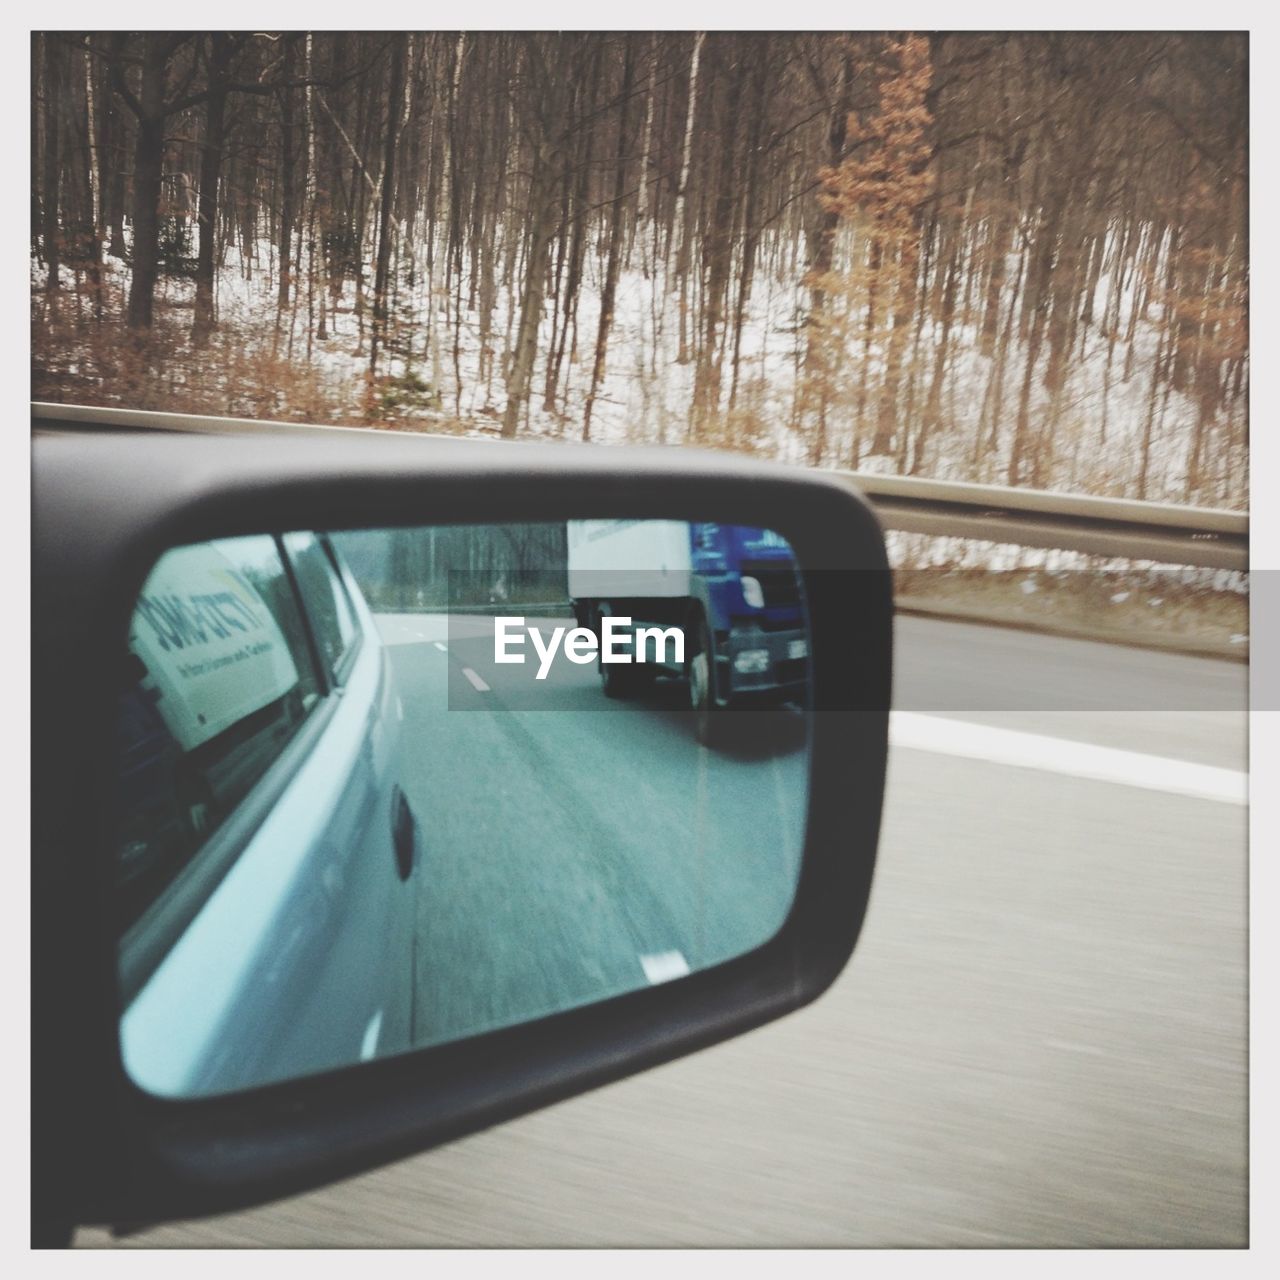 Reflection of car in side-view mirror against road and trees during winter